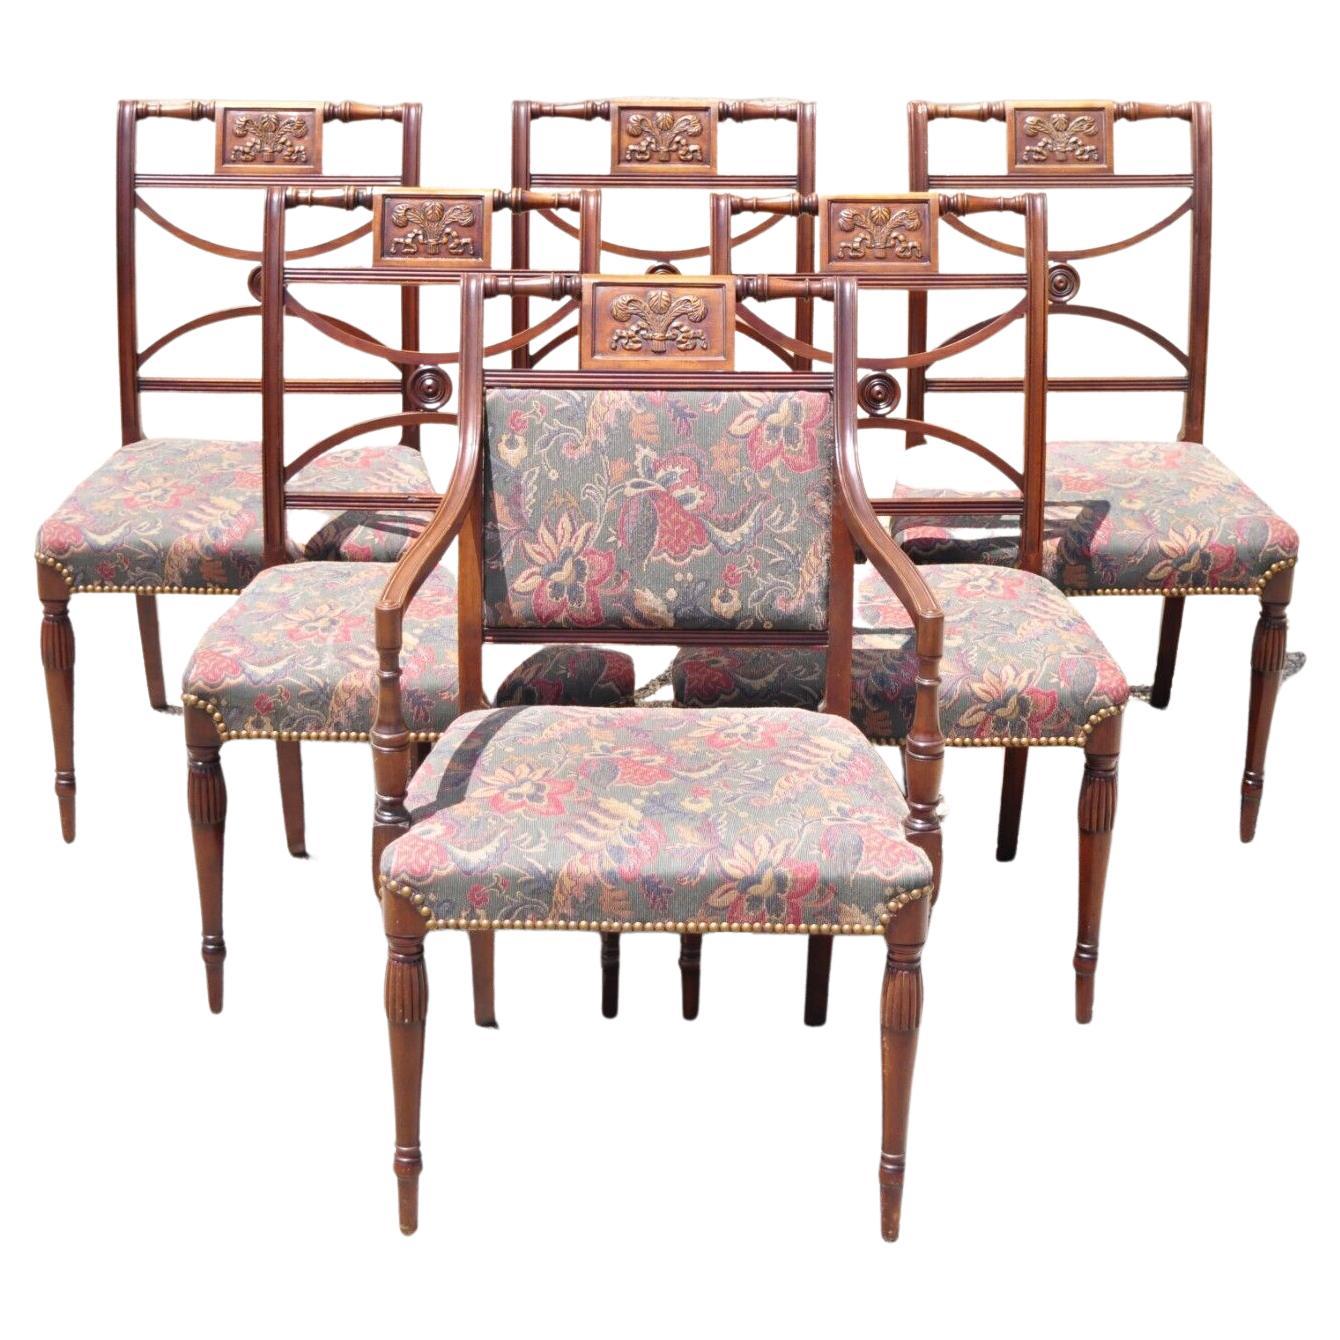 Vintage Mahogany English Sheraton Style Dining Chairs Prince of Wales - Set of 6 For Sale